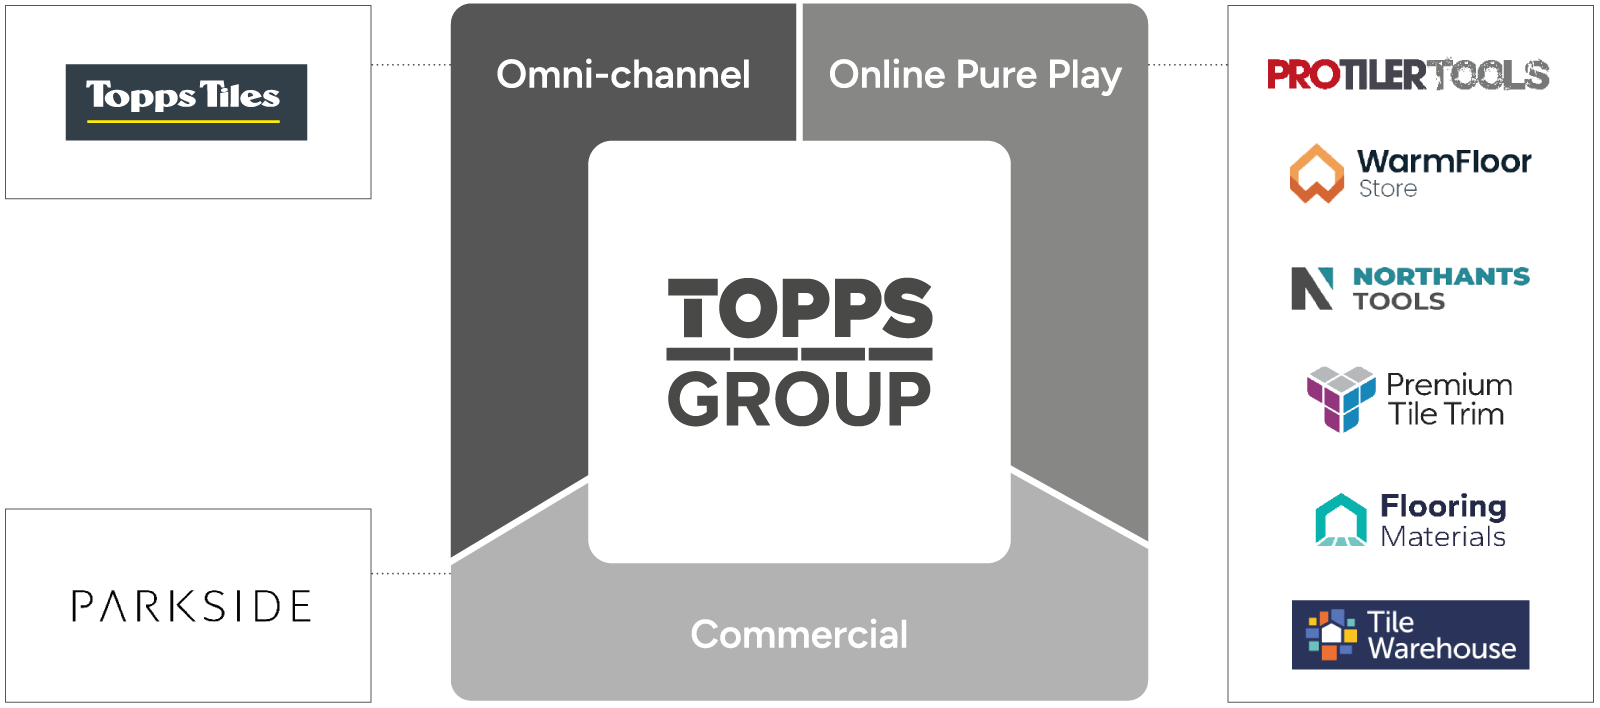 The group's three sales channels - omni-channel, online pure play and commercial